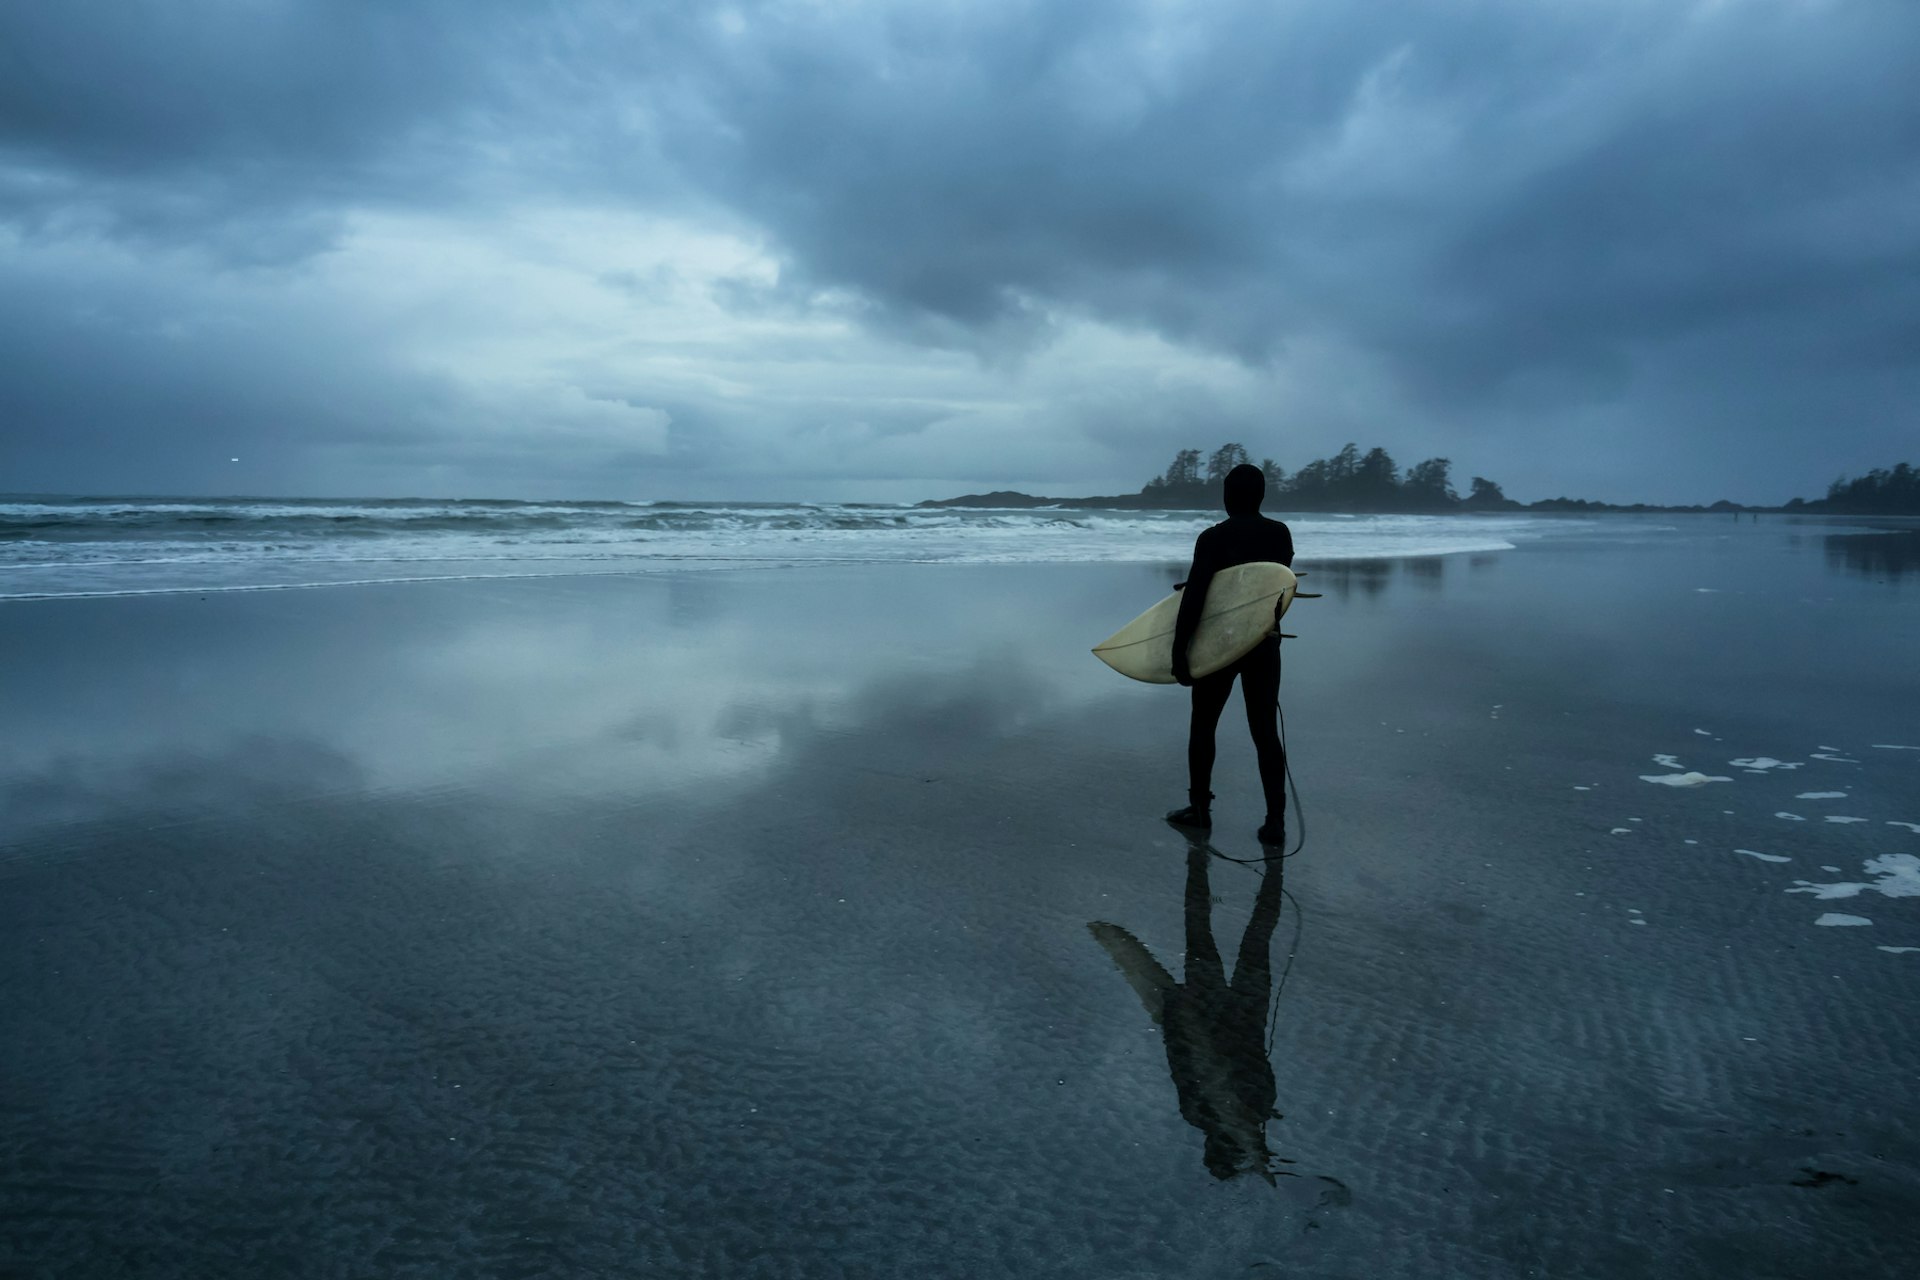 Surfer heading out in the ocean during a cloudy winter sunset, Chesterman Beach, Tofino, Vancouver Island, British Columbia, Canada